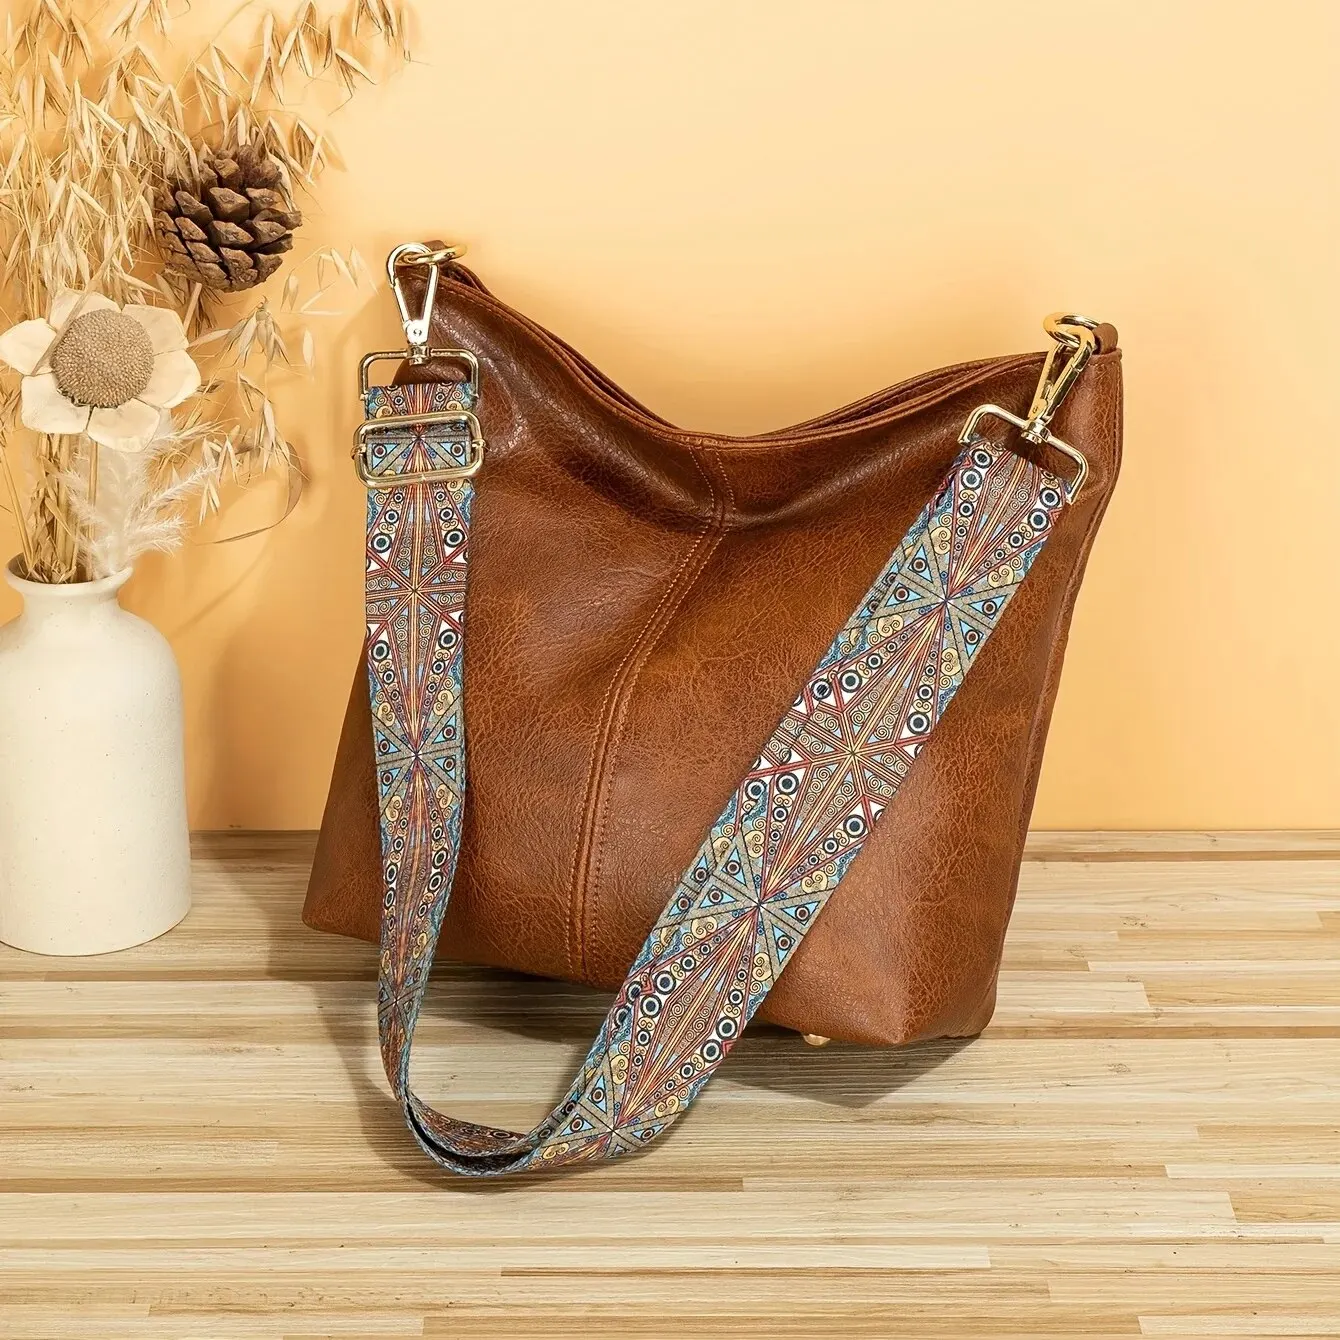 Style bucket crossbody bag boho style shoulder bag faux leather purse with ethnic strap thumb200